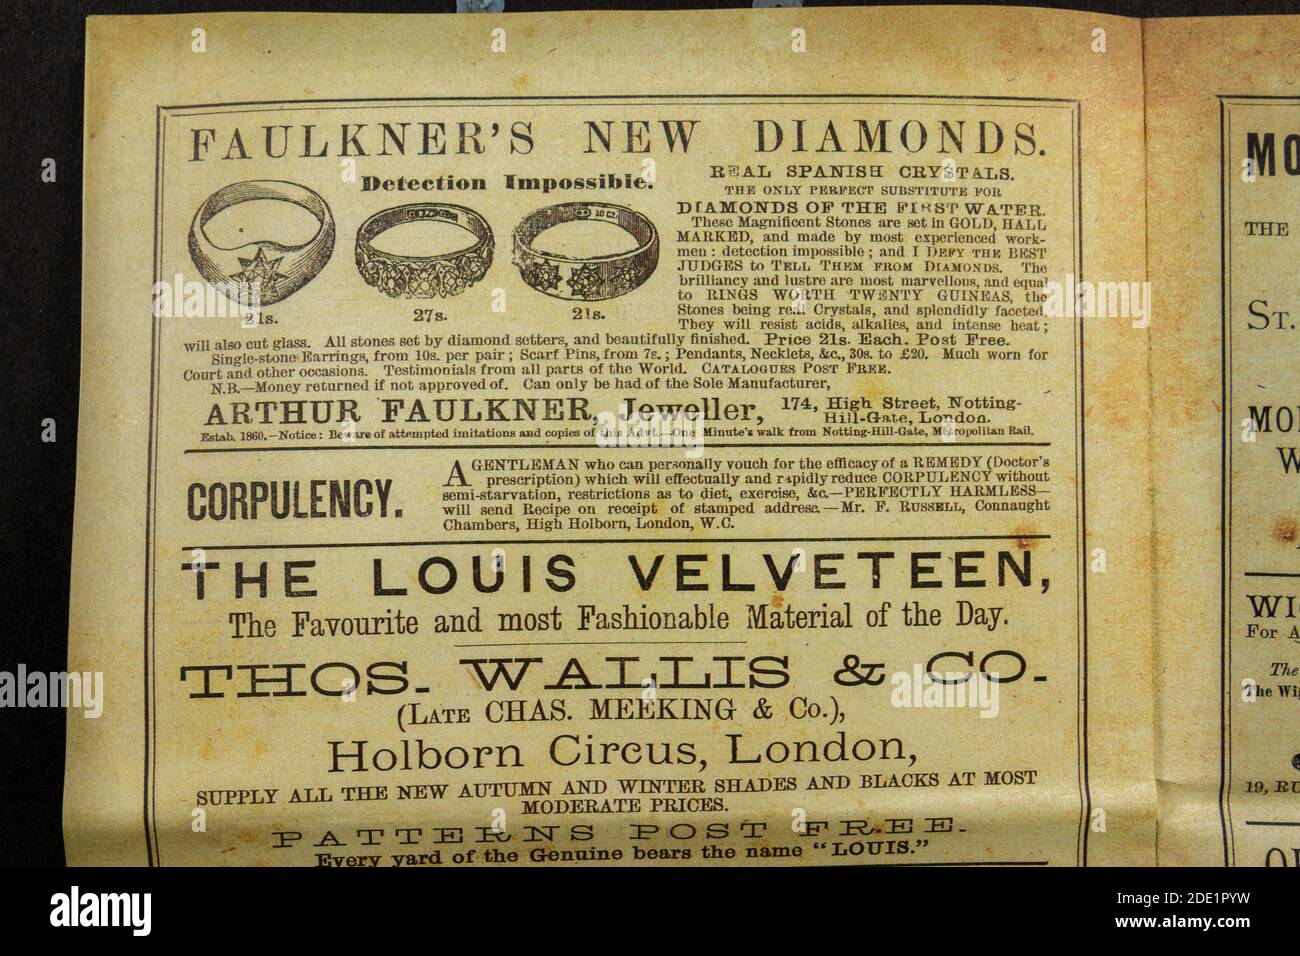 Adverts for the London jeweller Arthur Faulkner (and for Velveteen) in the Gaiety Theatre programme (replica), 22nd October 1883. Stock Photo